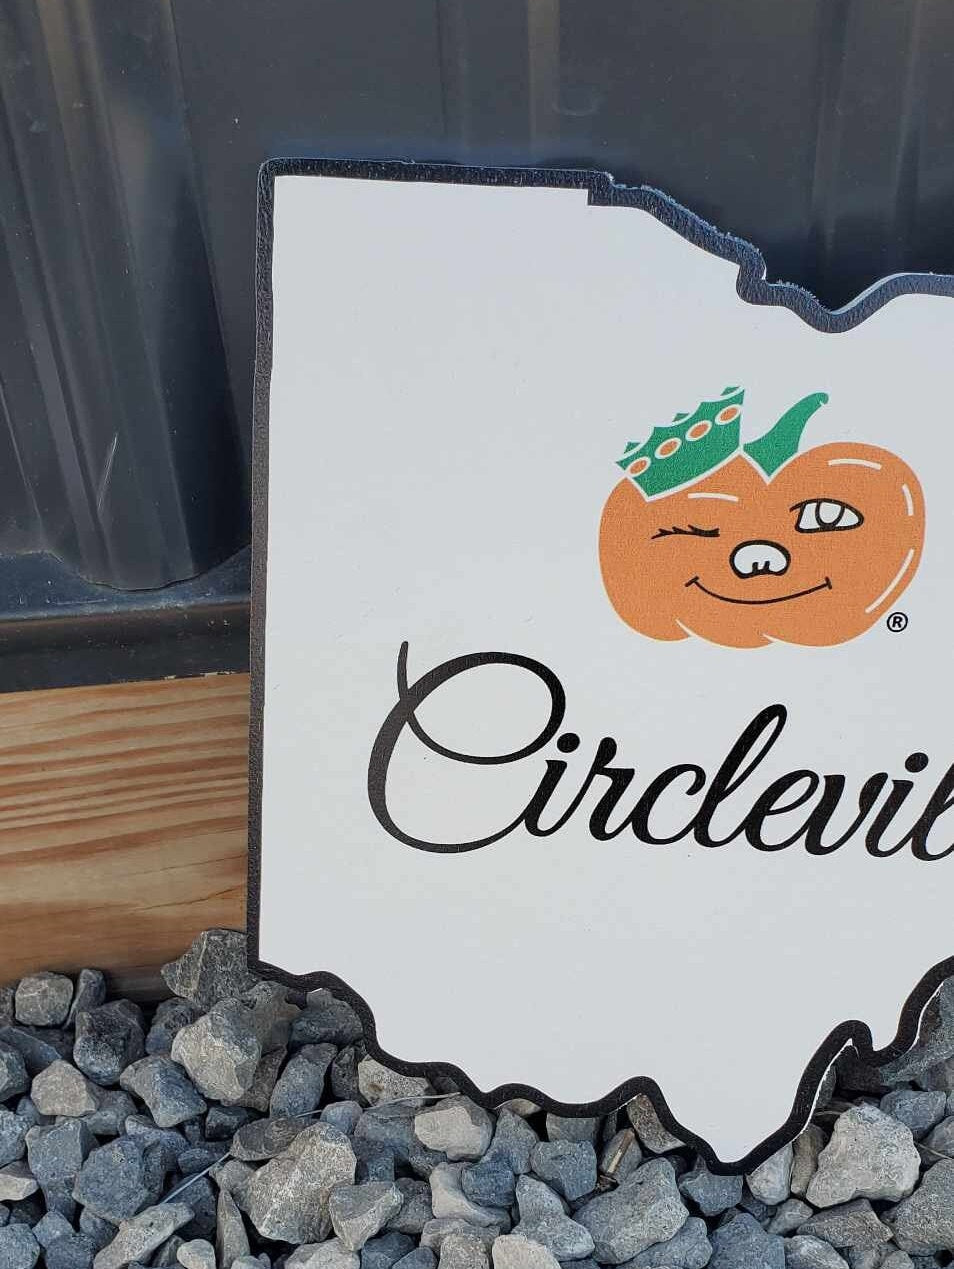 Winky Circleville Ohio Pumpkin Show Hometown Small Town Printed on Wood State Cut out Decor Plaque Wall Art Color Wood Print